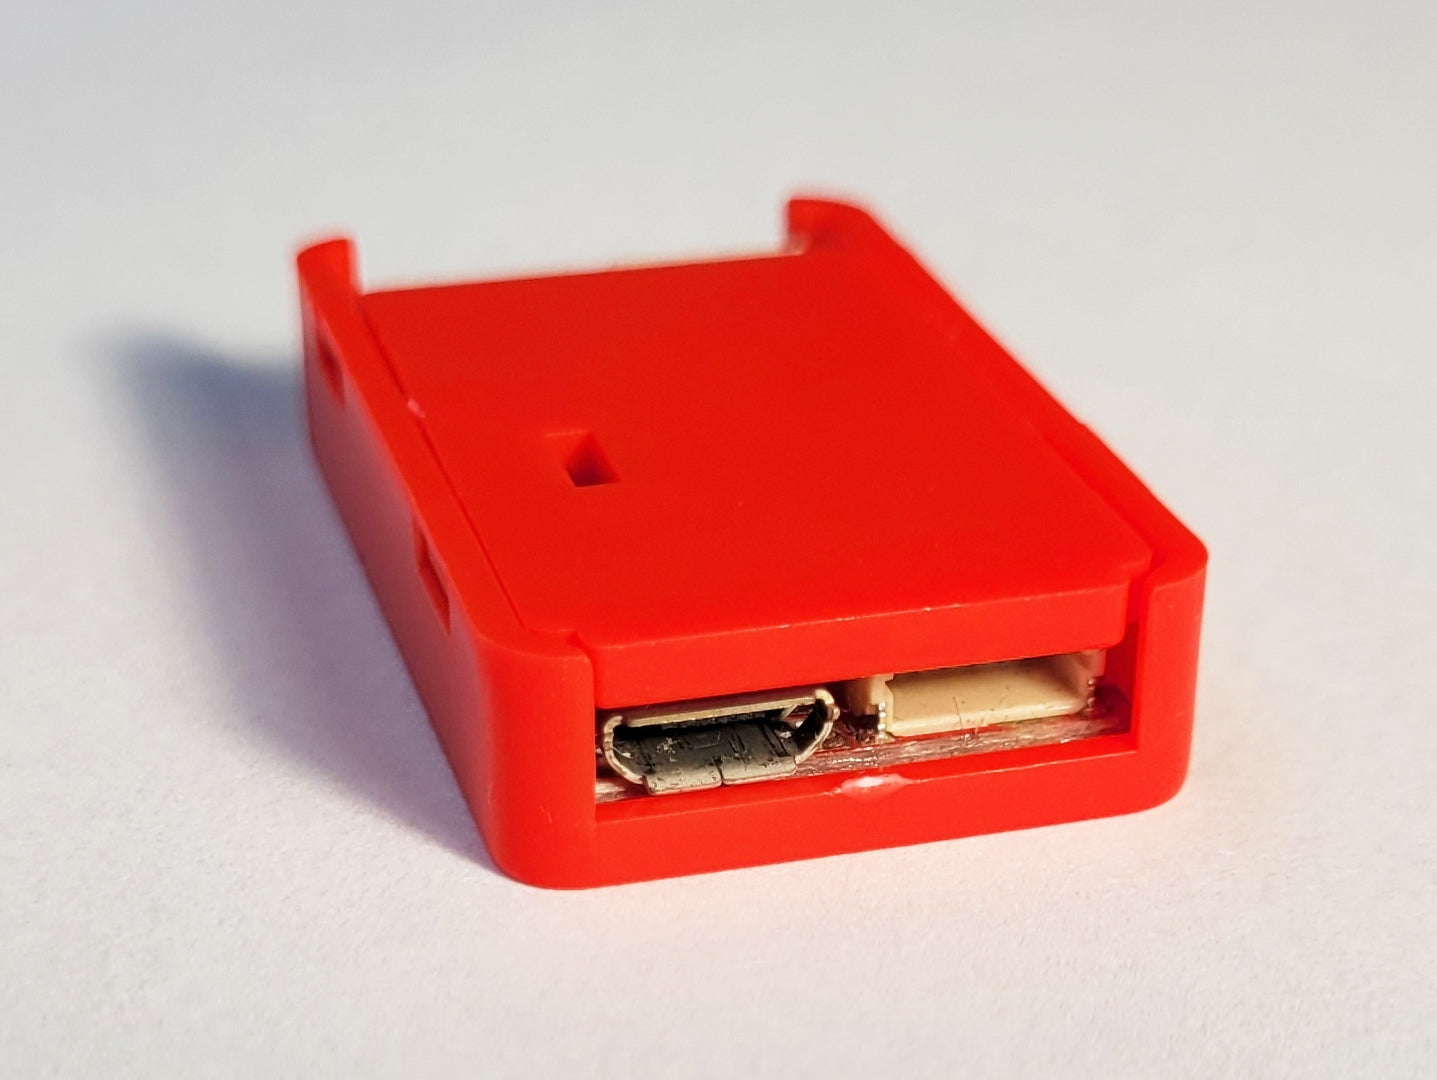 CANFace CF1 "Babel" CAN-USB/UART Adapter